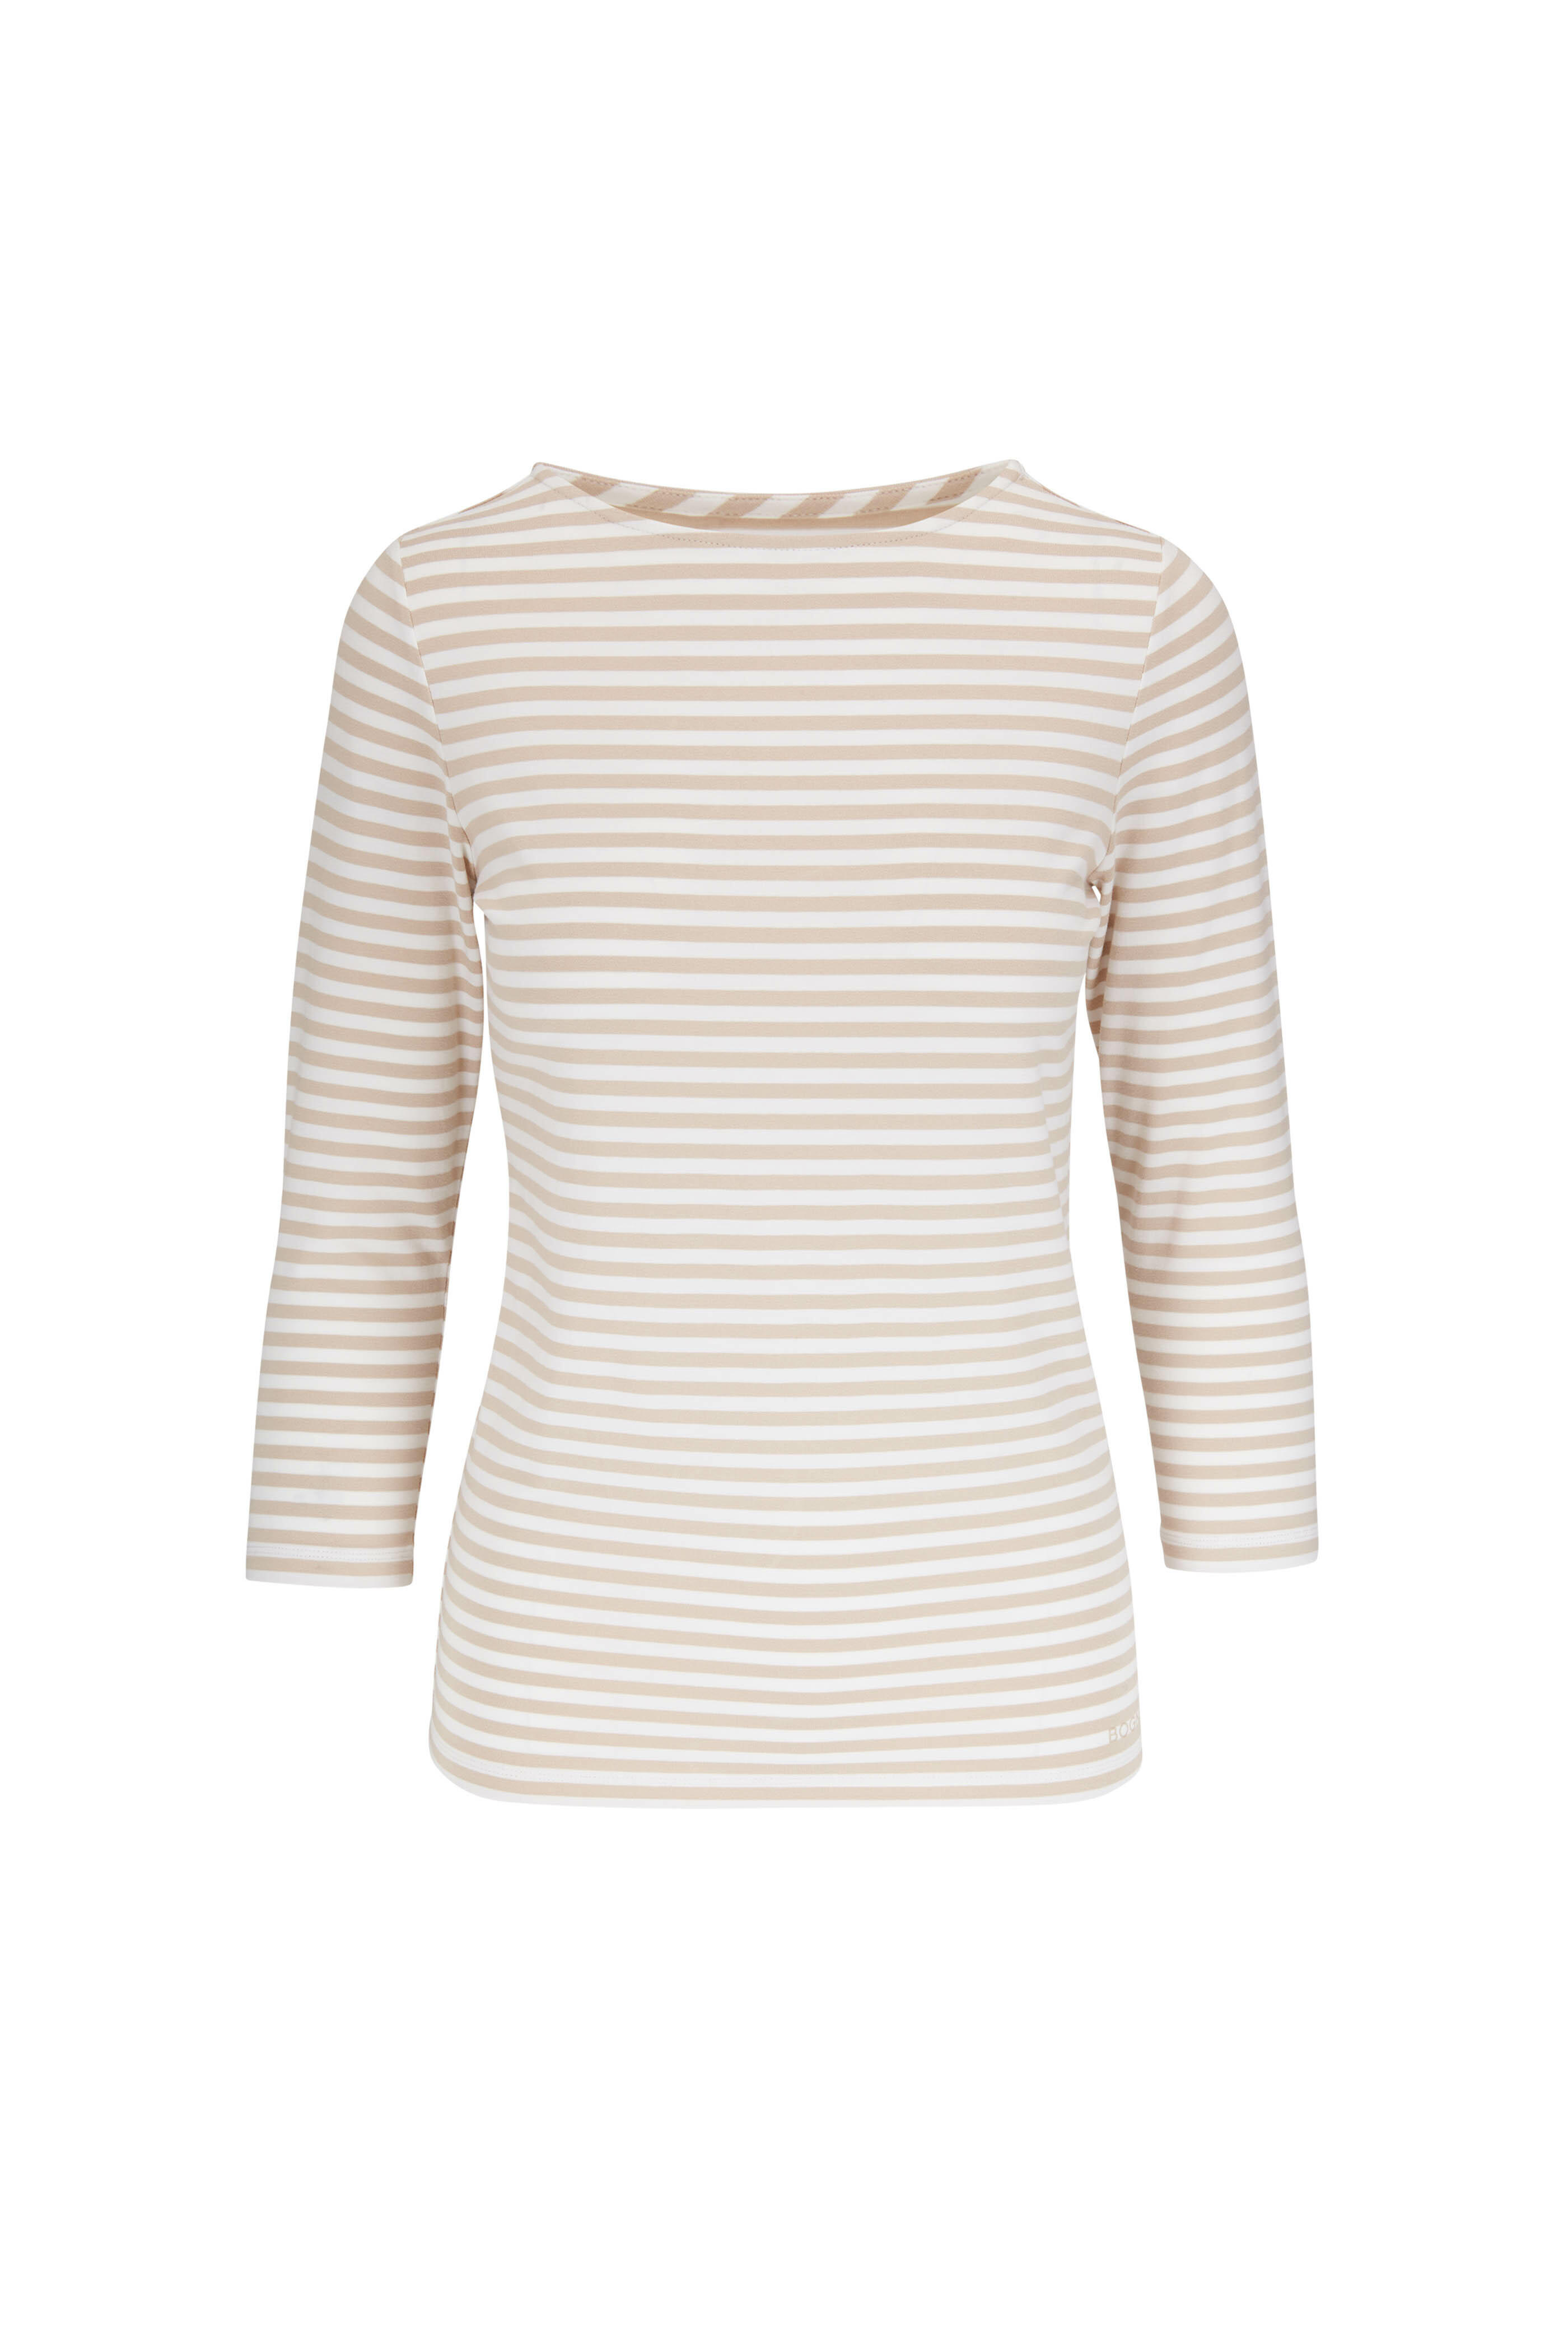 Bogner - Louna Ginger Striped Top | Mitchell Stores